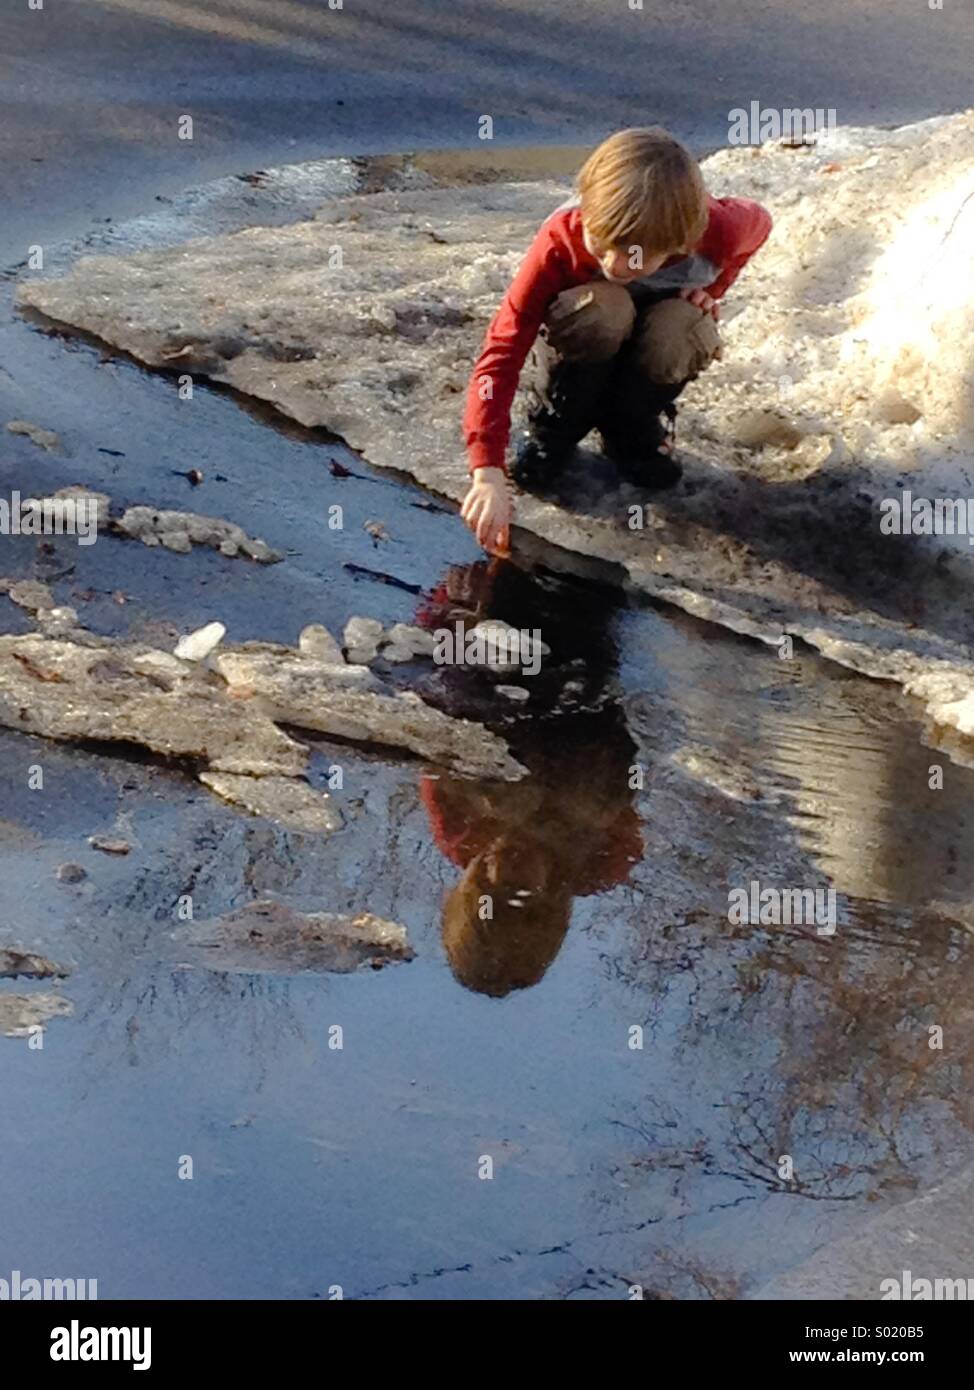 7 year old boy plays in the spring meltwater Stock Photo